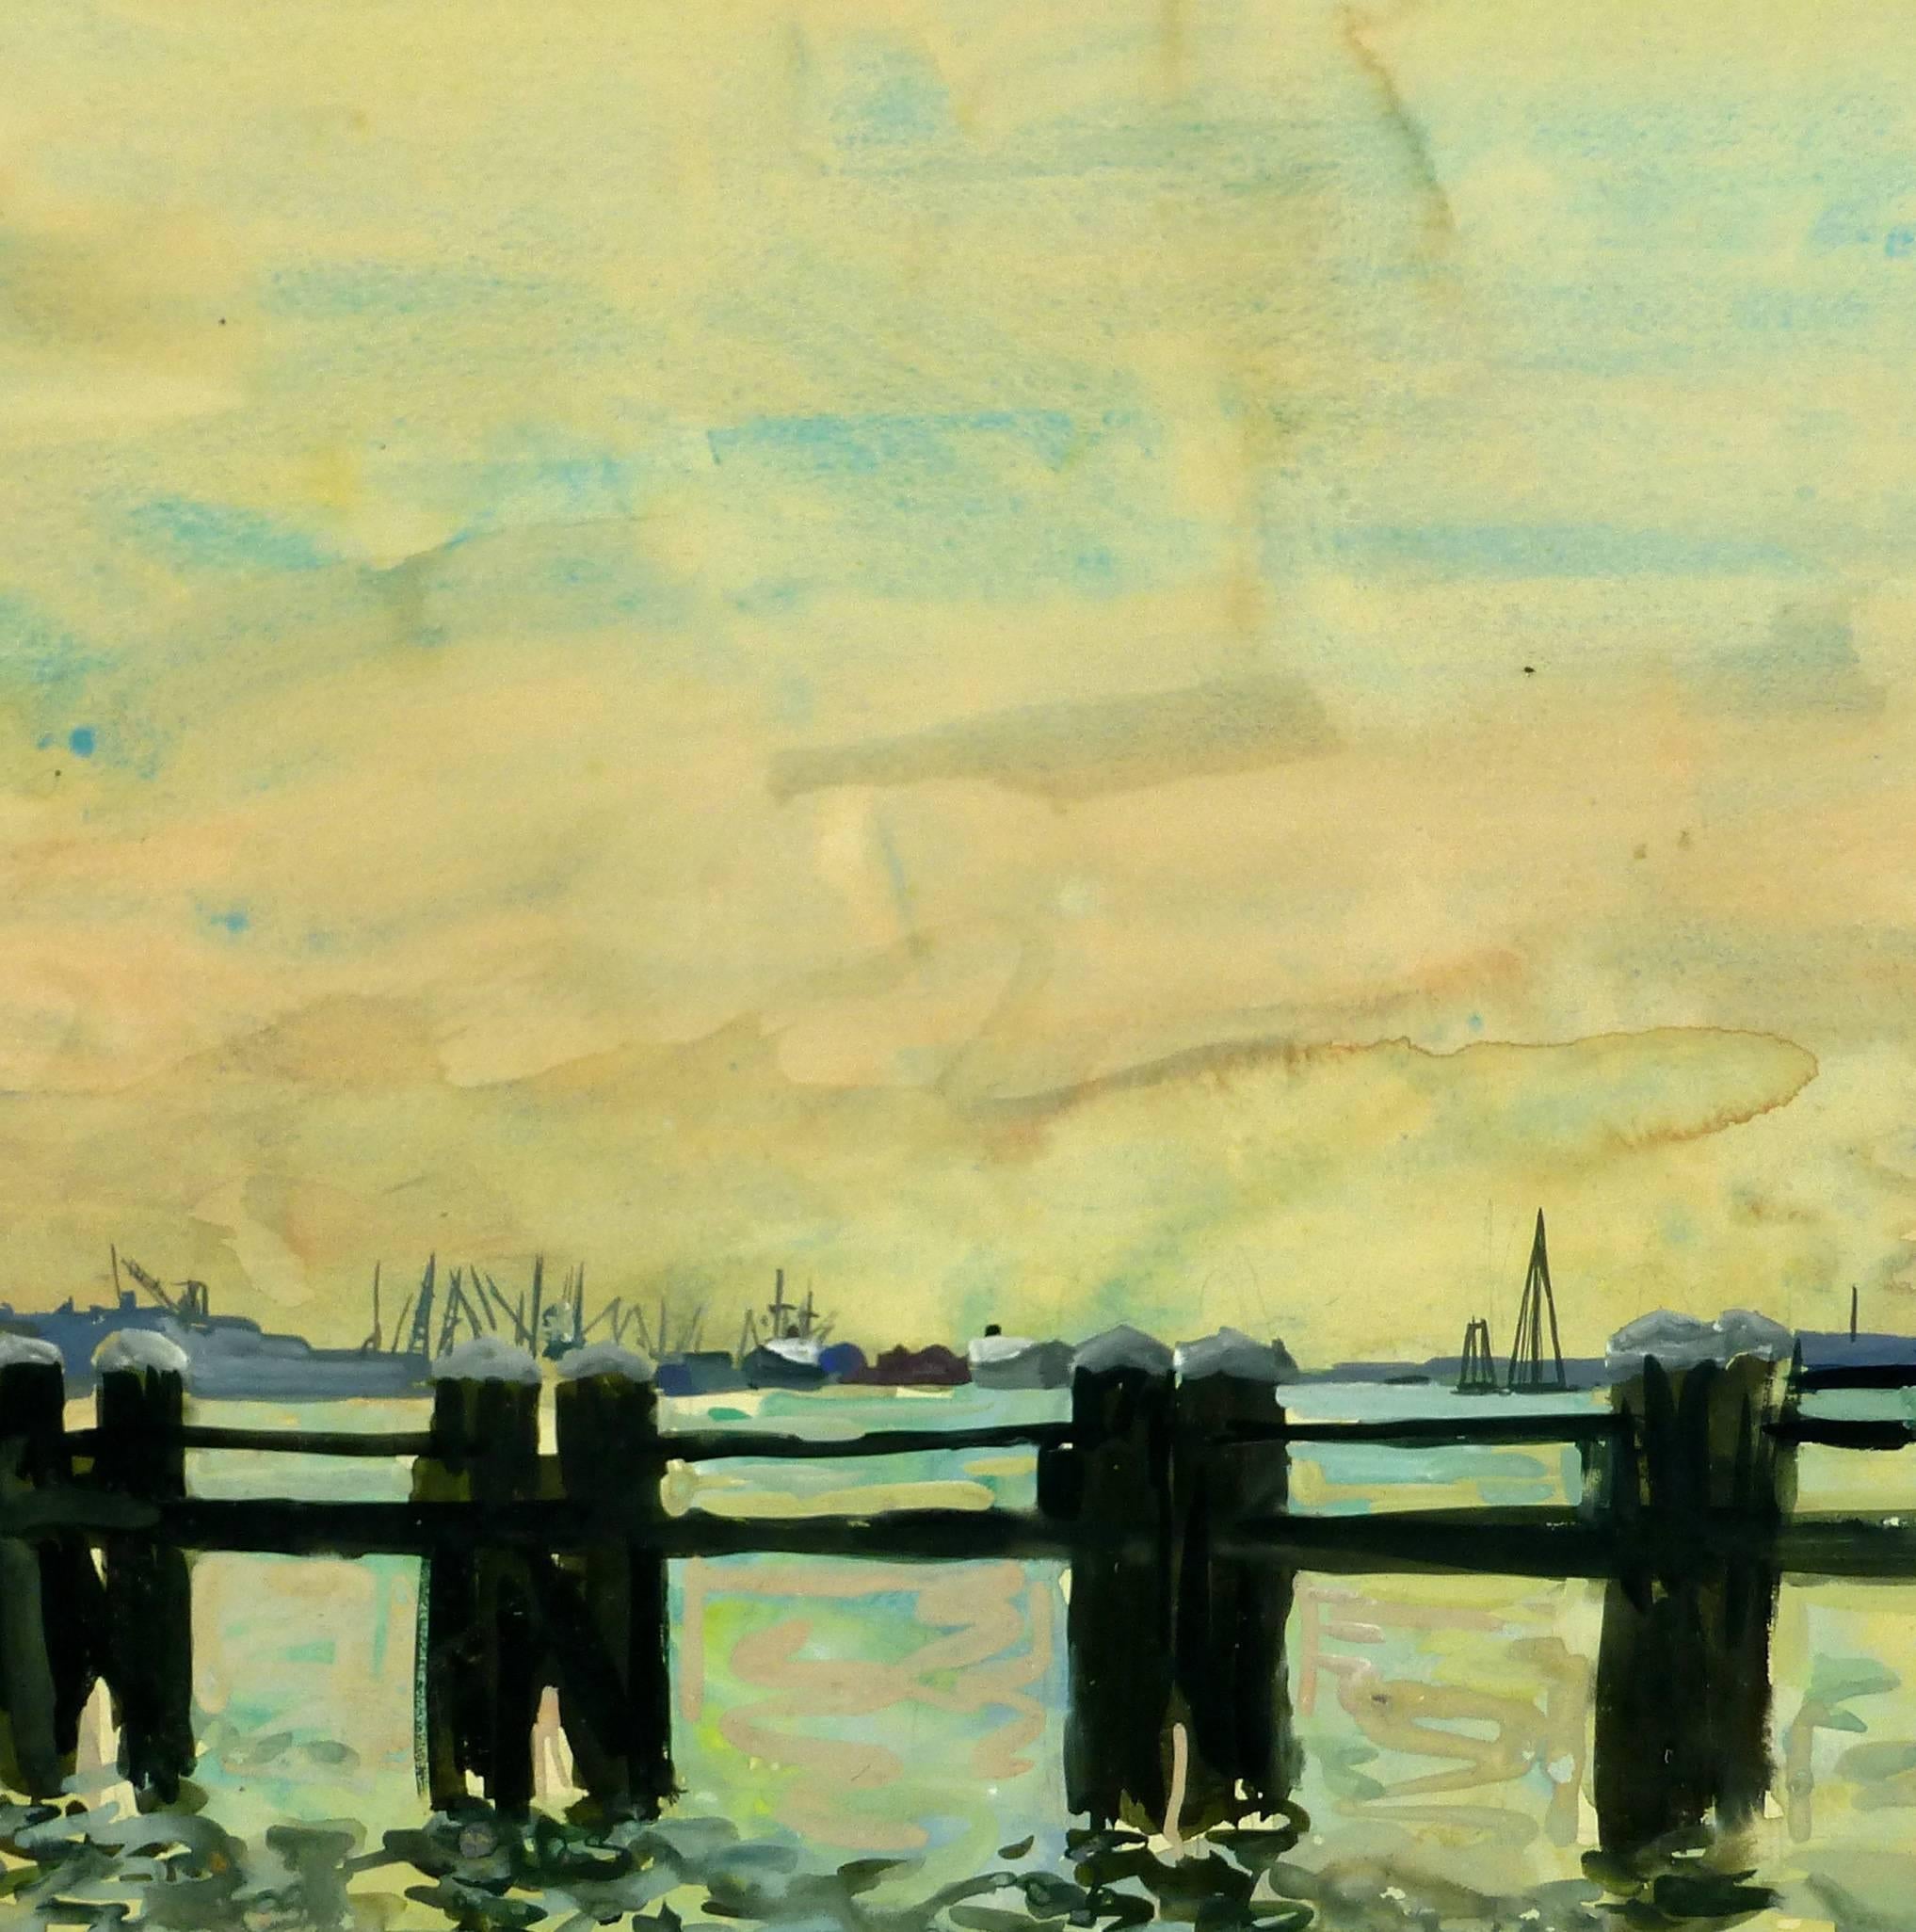 Gouache painting of pier with port in background by French artist Stephane Magnard (1917-2010).

Original artwork on paper displayed on a white mat with a gold border. Archival plastic sleeve and Certificate of Authenticity included. Artwork,